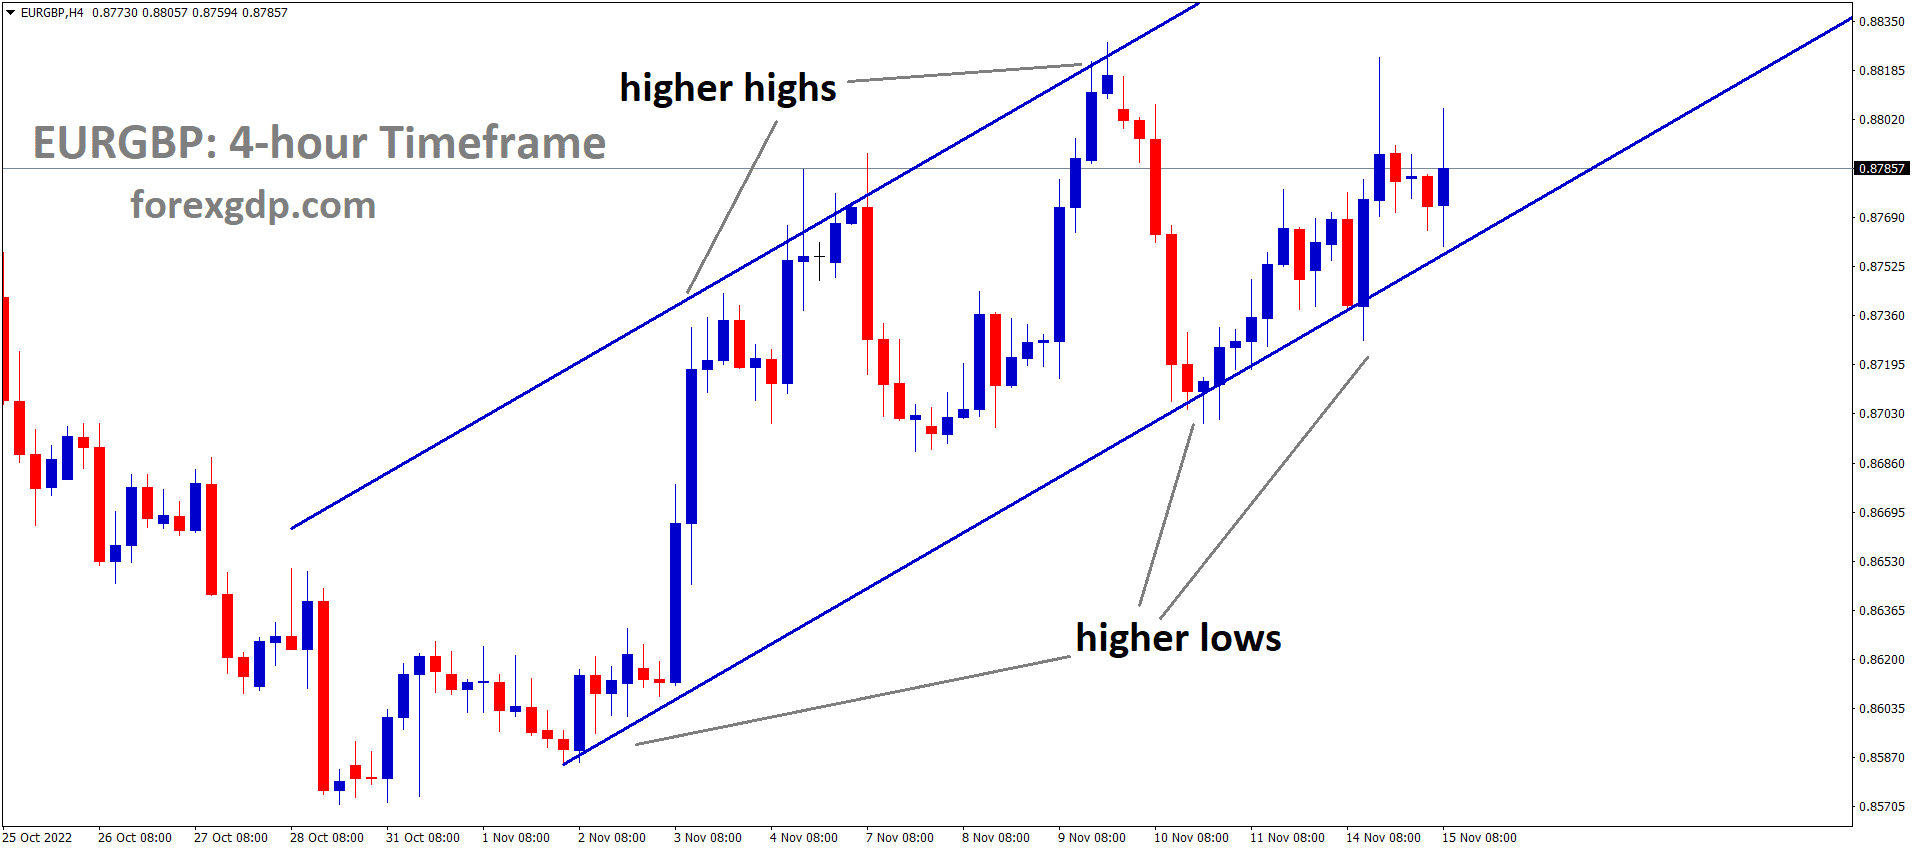 EURGBP is moving in an Ascending channel and the market has rebounded from the higher low area of the channel